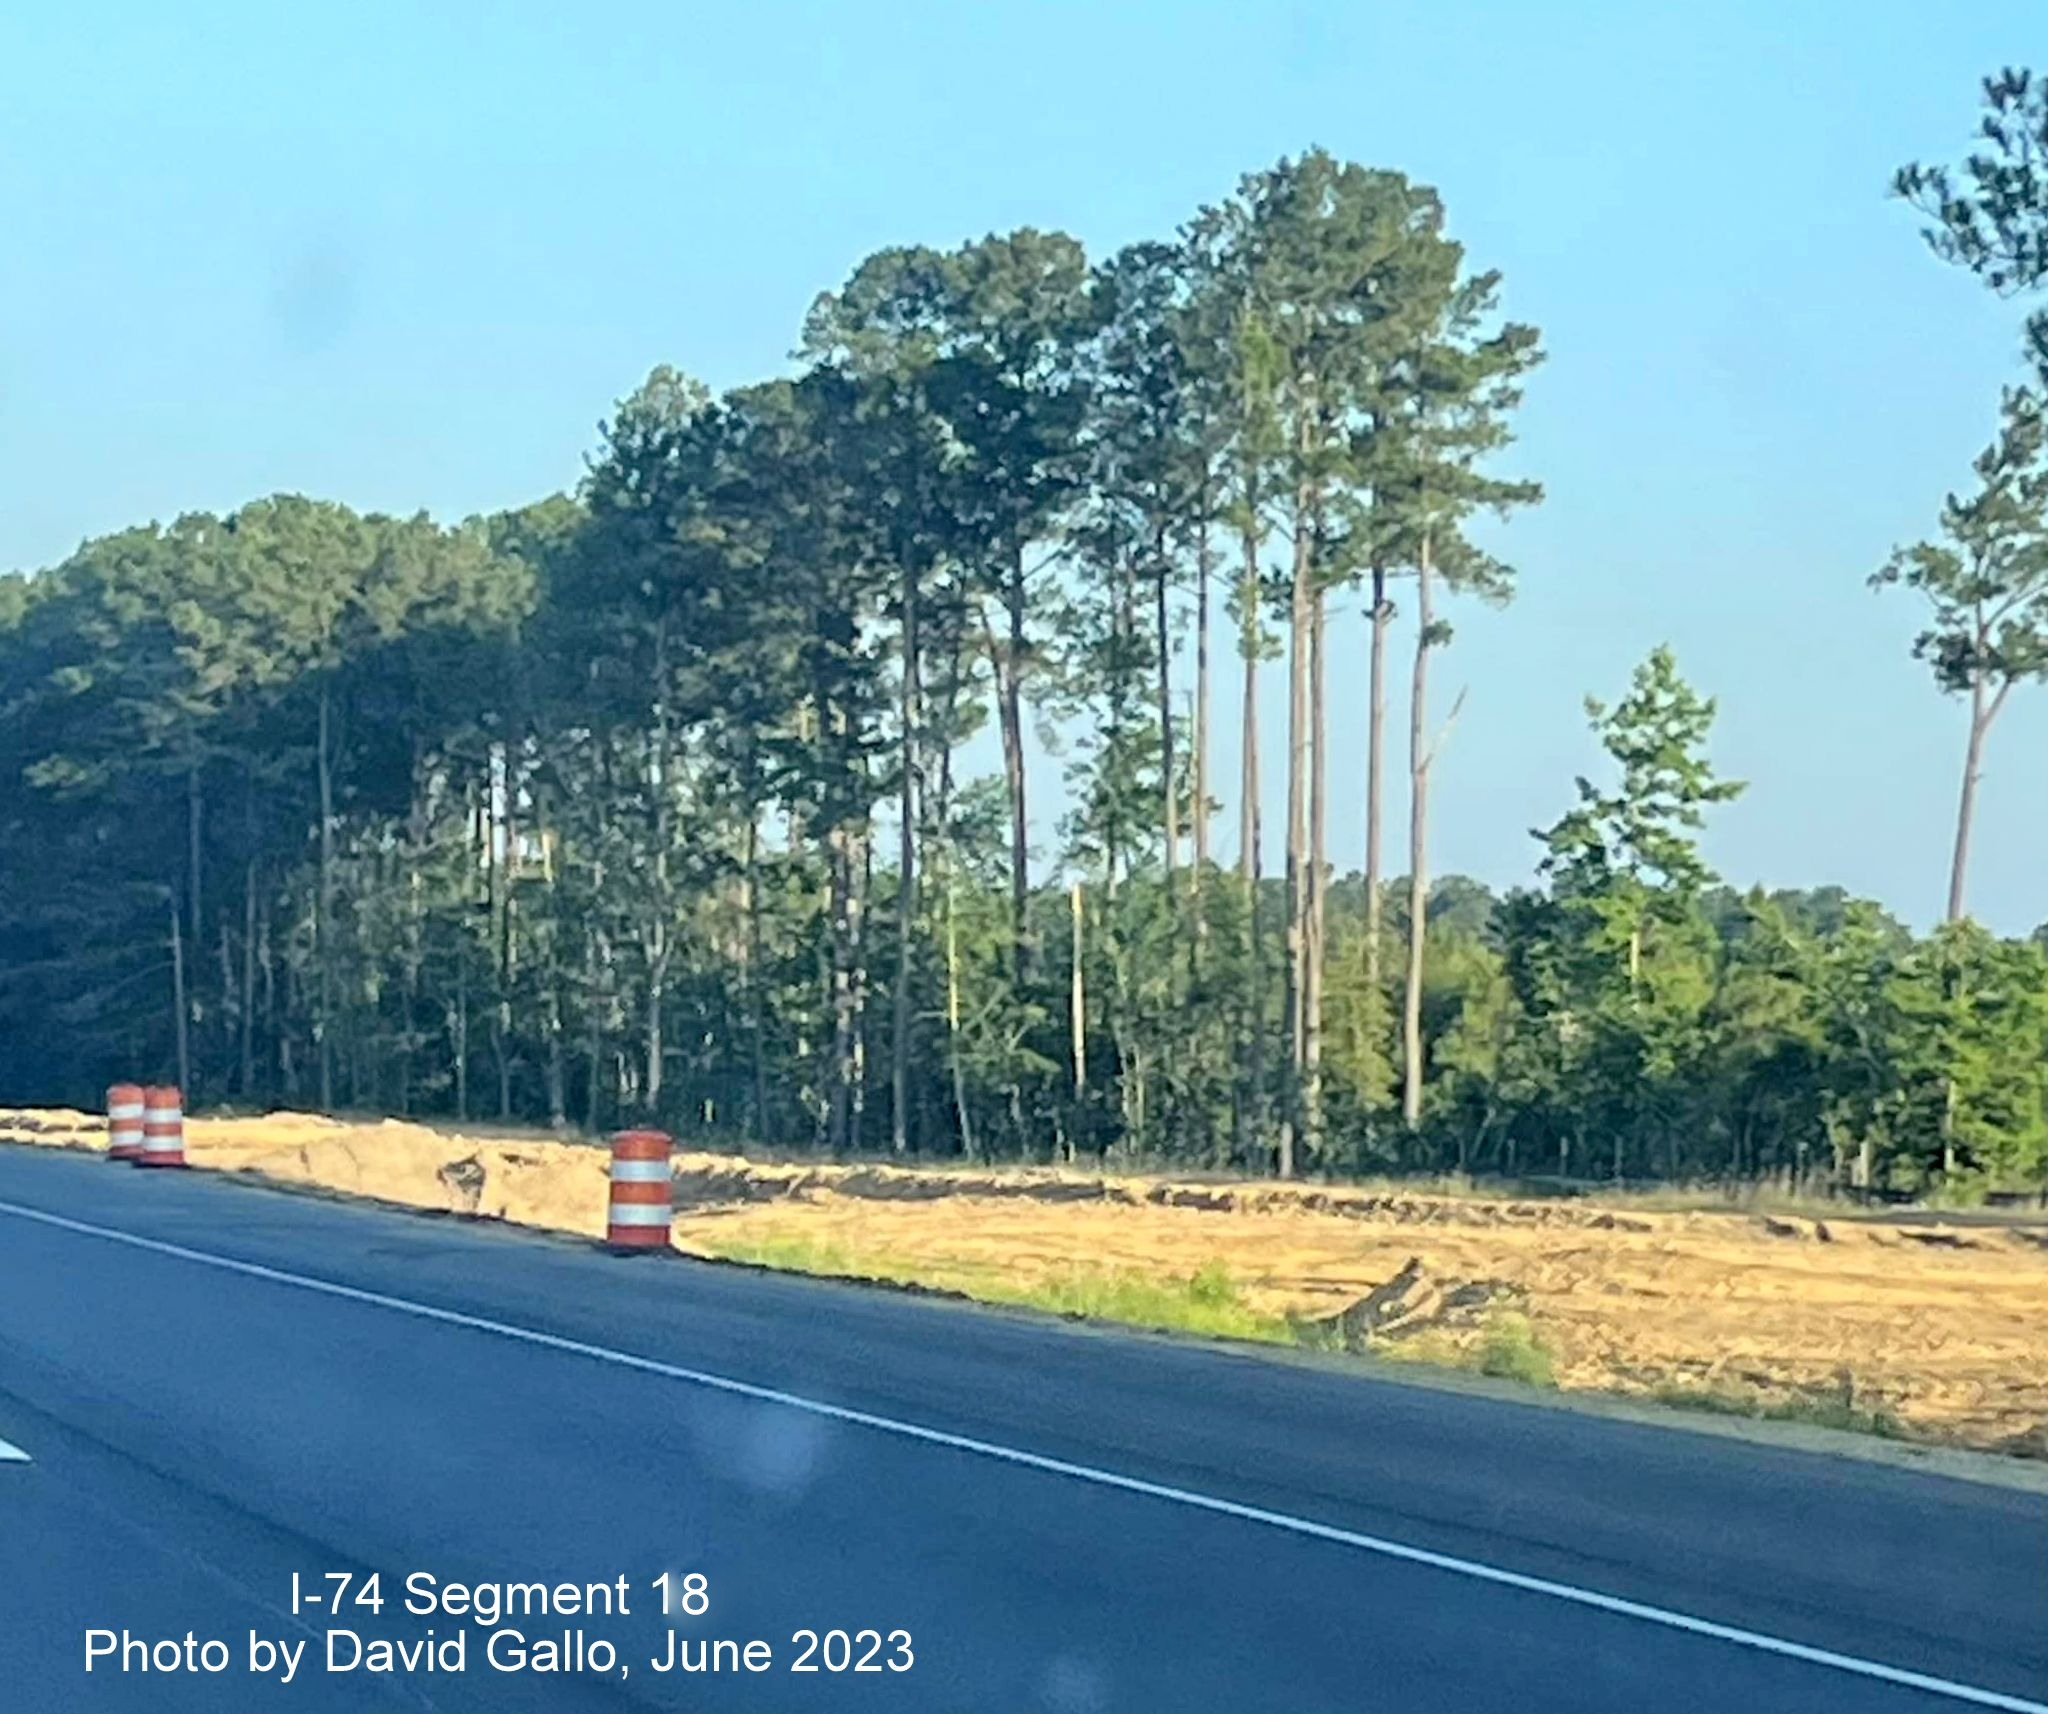 Image of future on-ramp from Chauncey Town Road being graded along US 74/76 (Future I-74) West
         in Lake Waccamaw, by David Gallo, June 2023